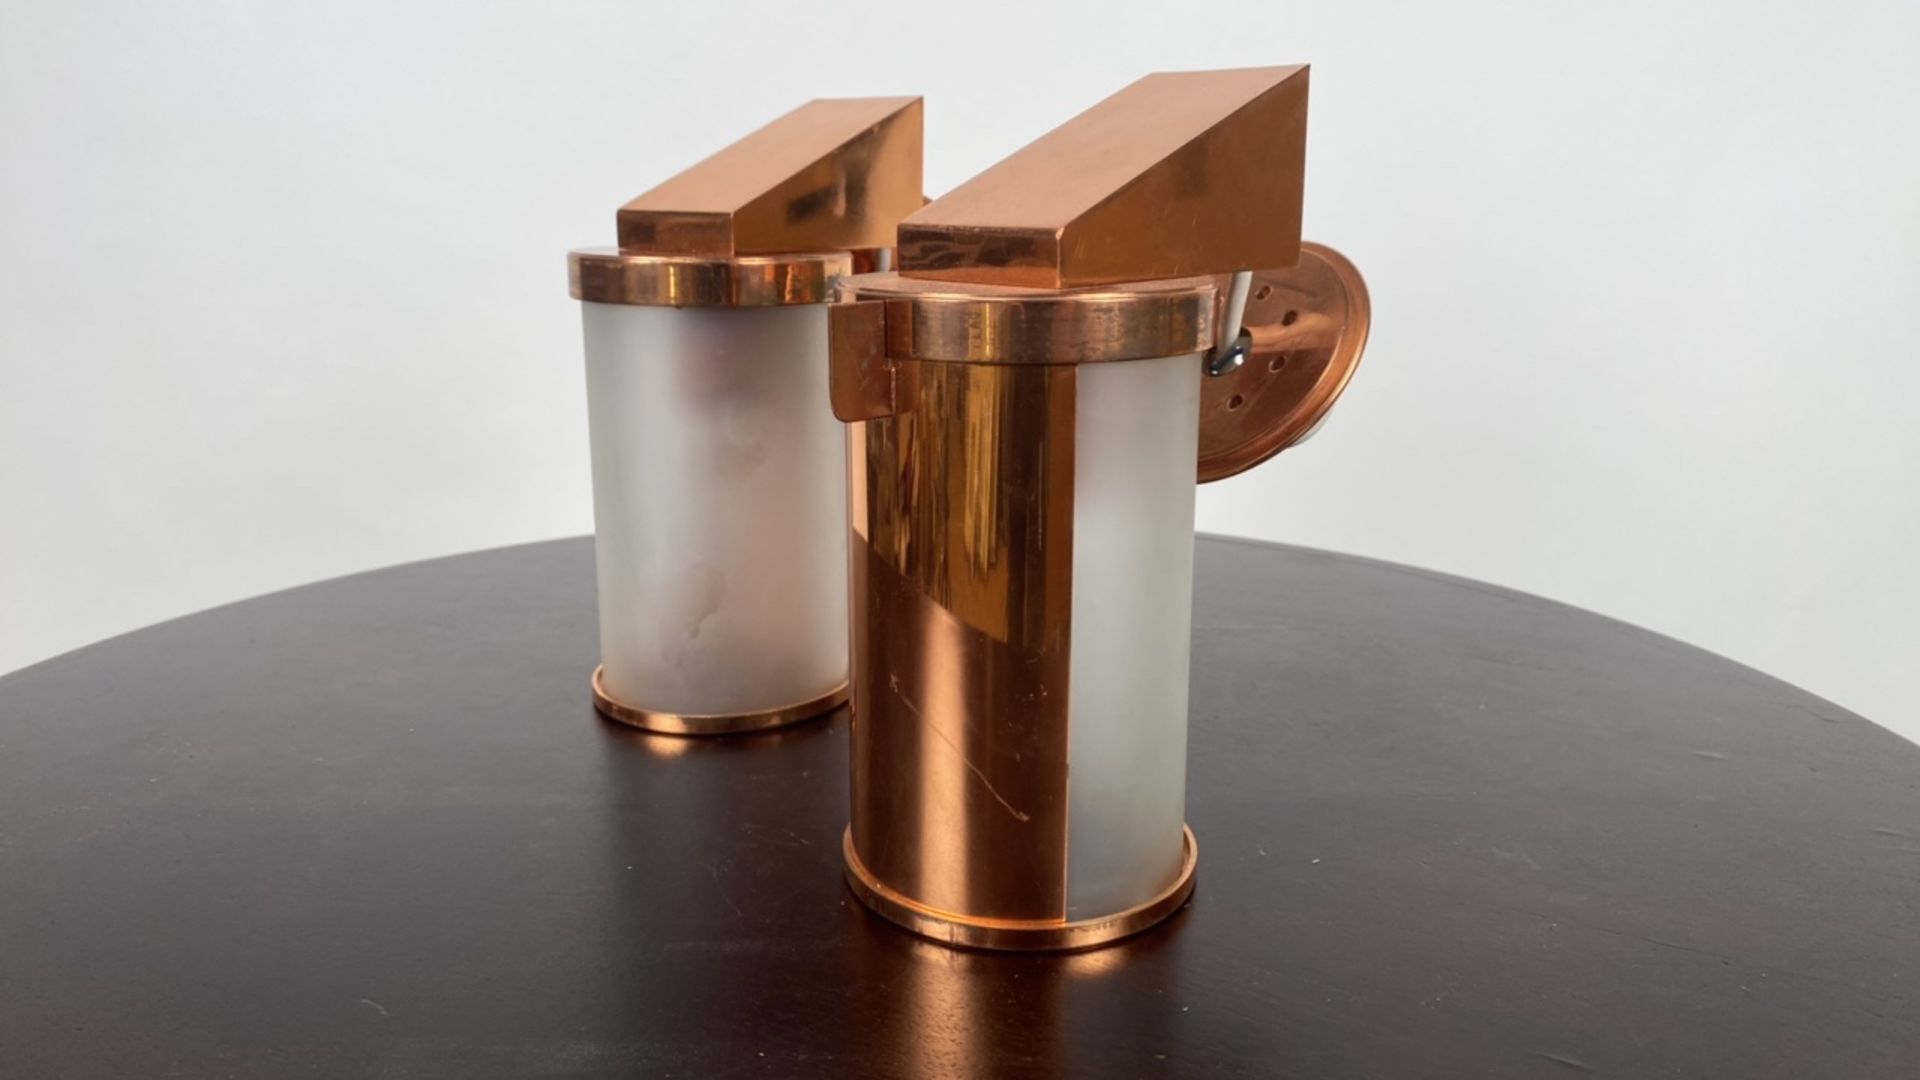 Set of 4 Copper Wall Lights - Image 2 of 3